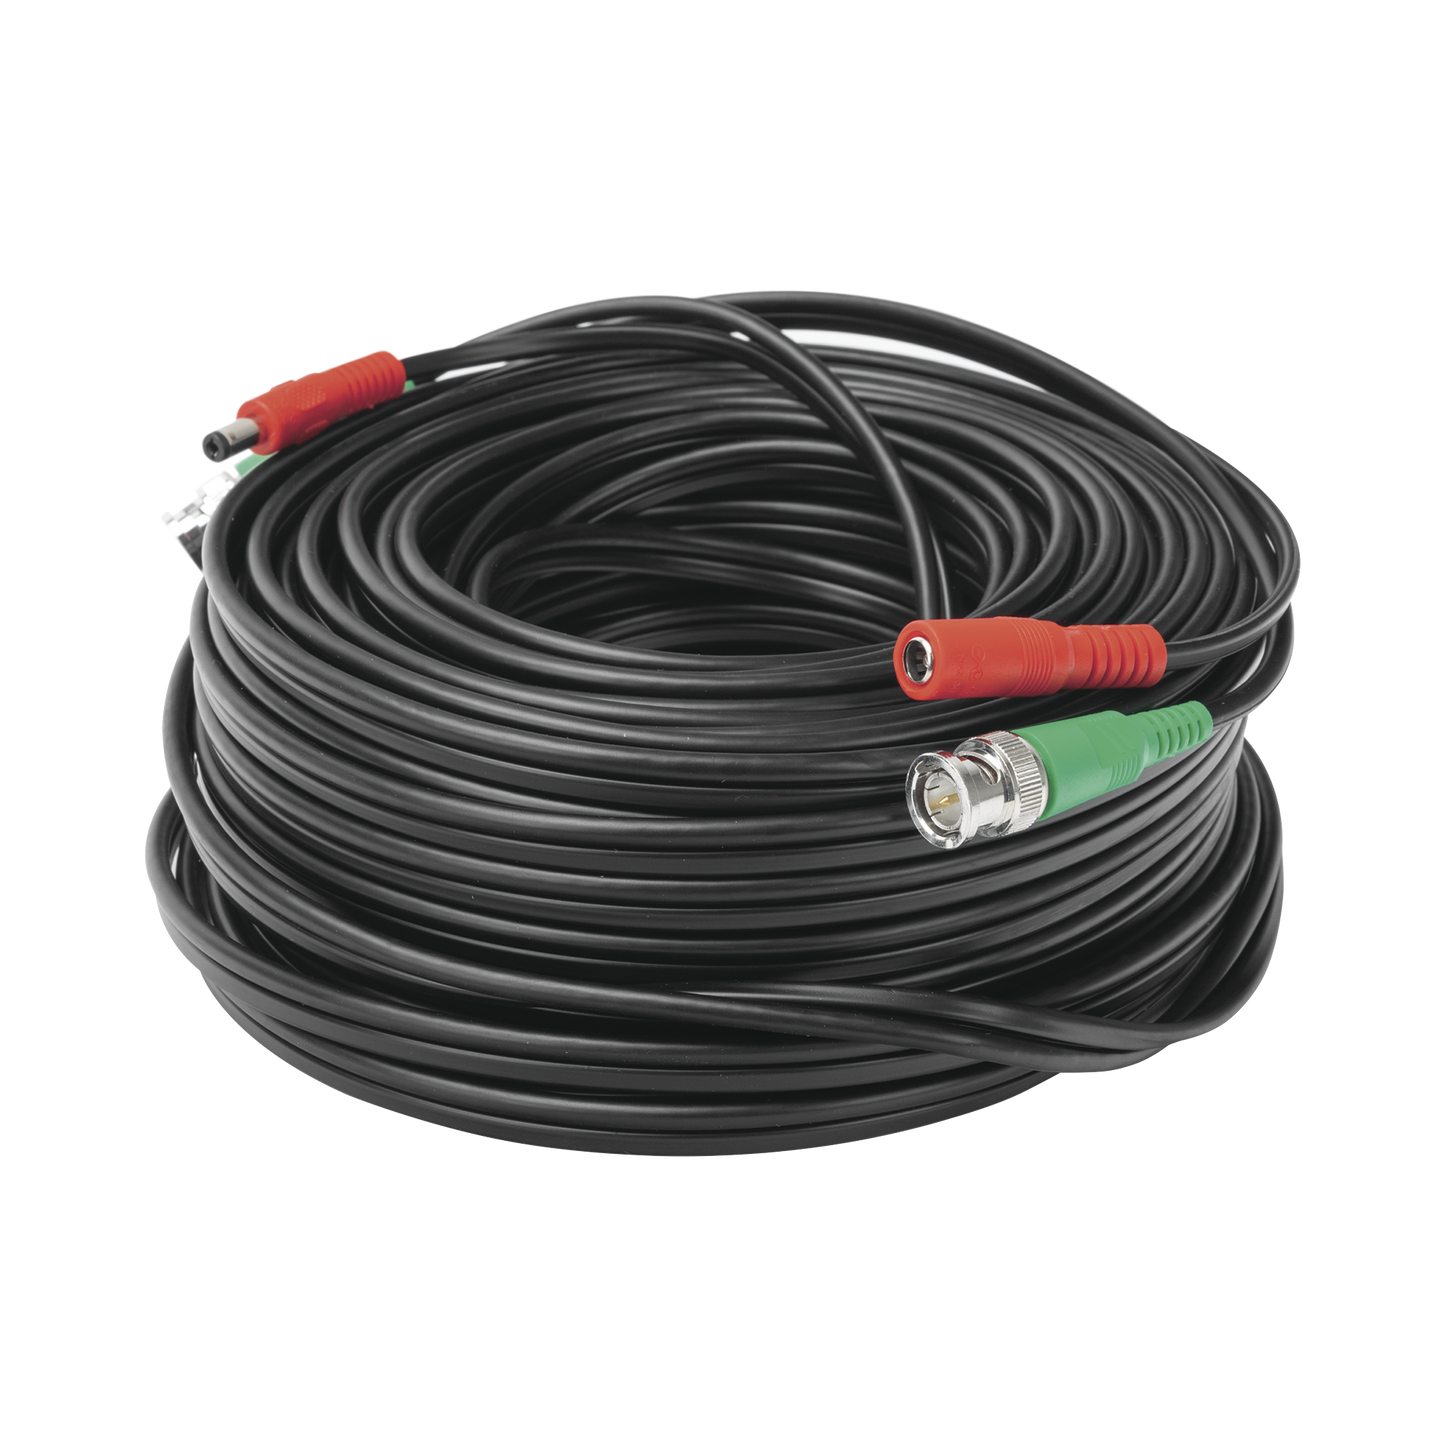 30 meters / Coaxial cable ( BNC ) + Power / 100% Copper / For 4K Cameras / Indoor use